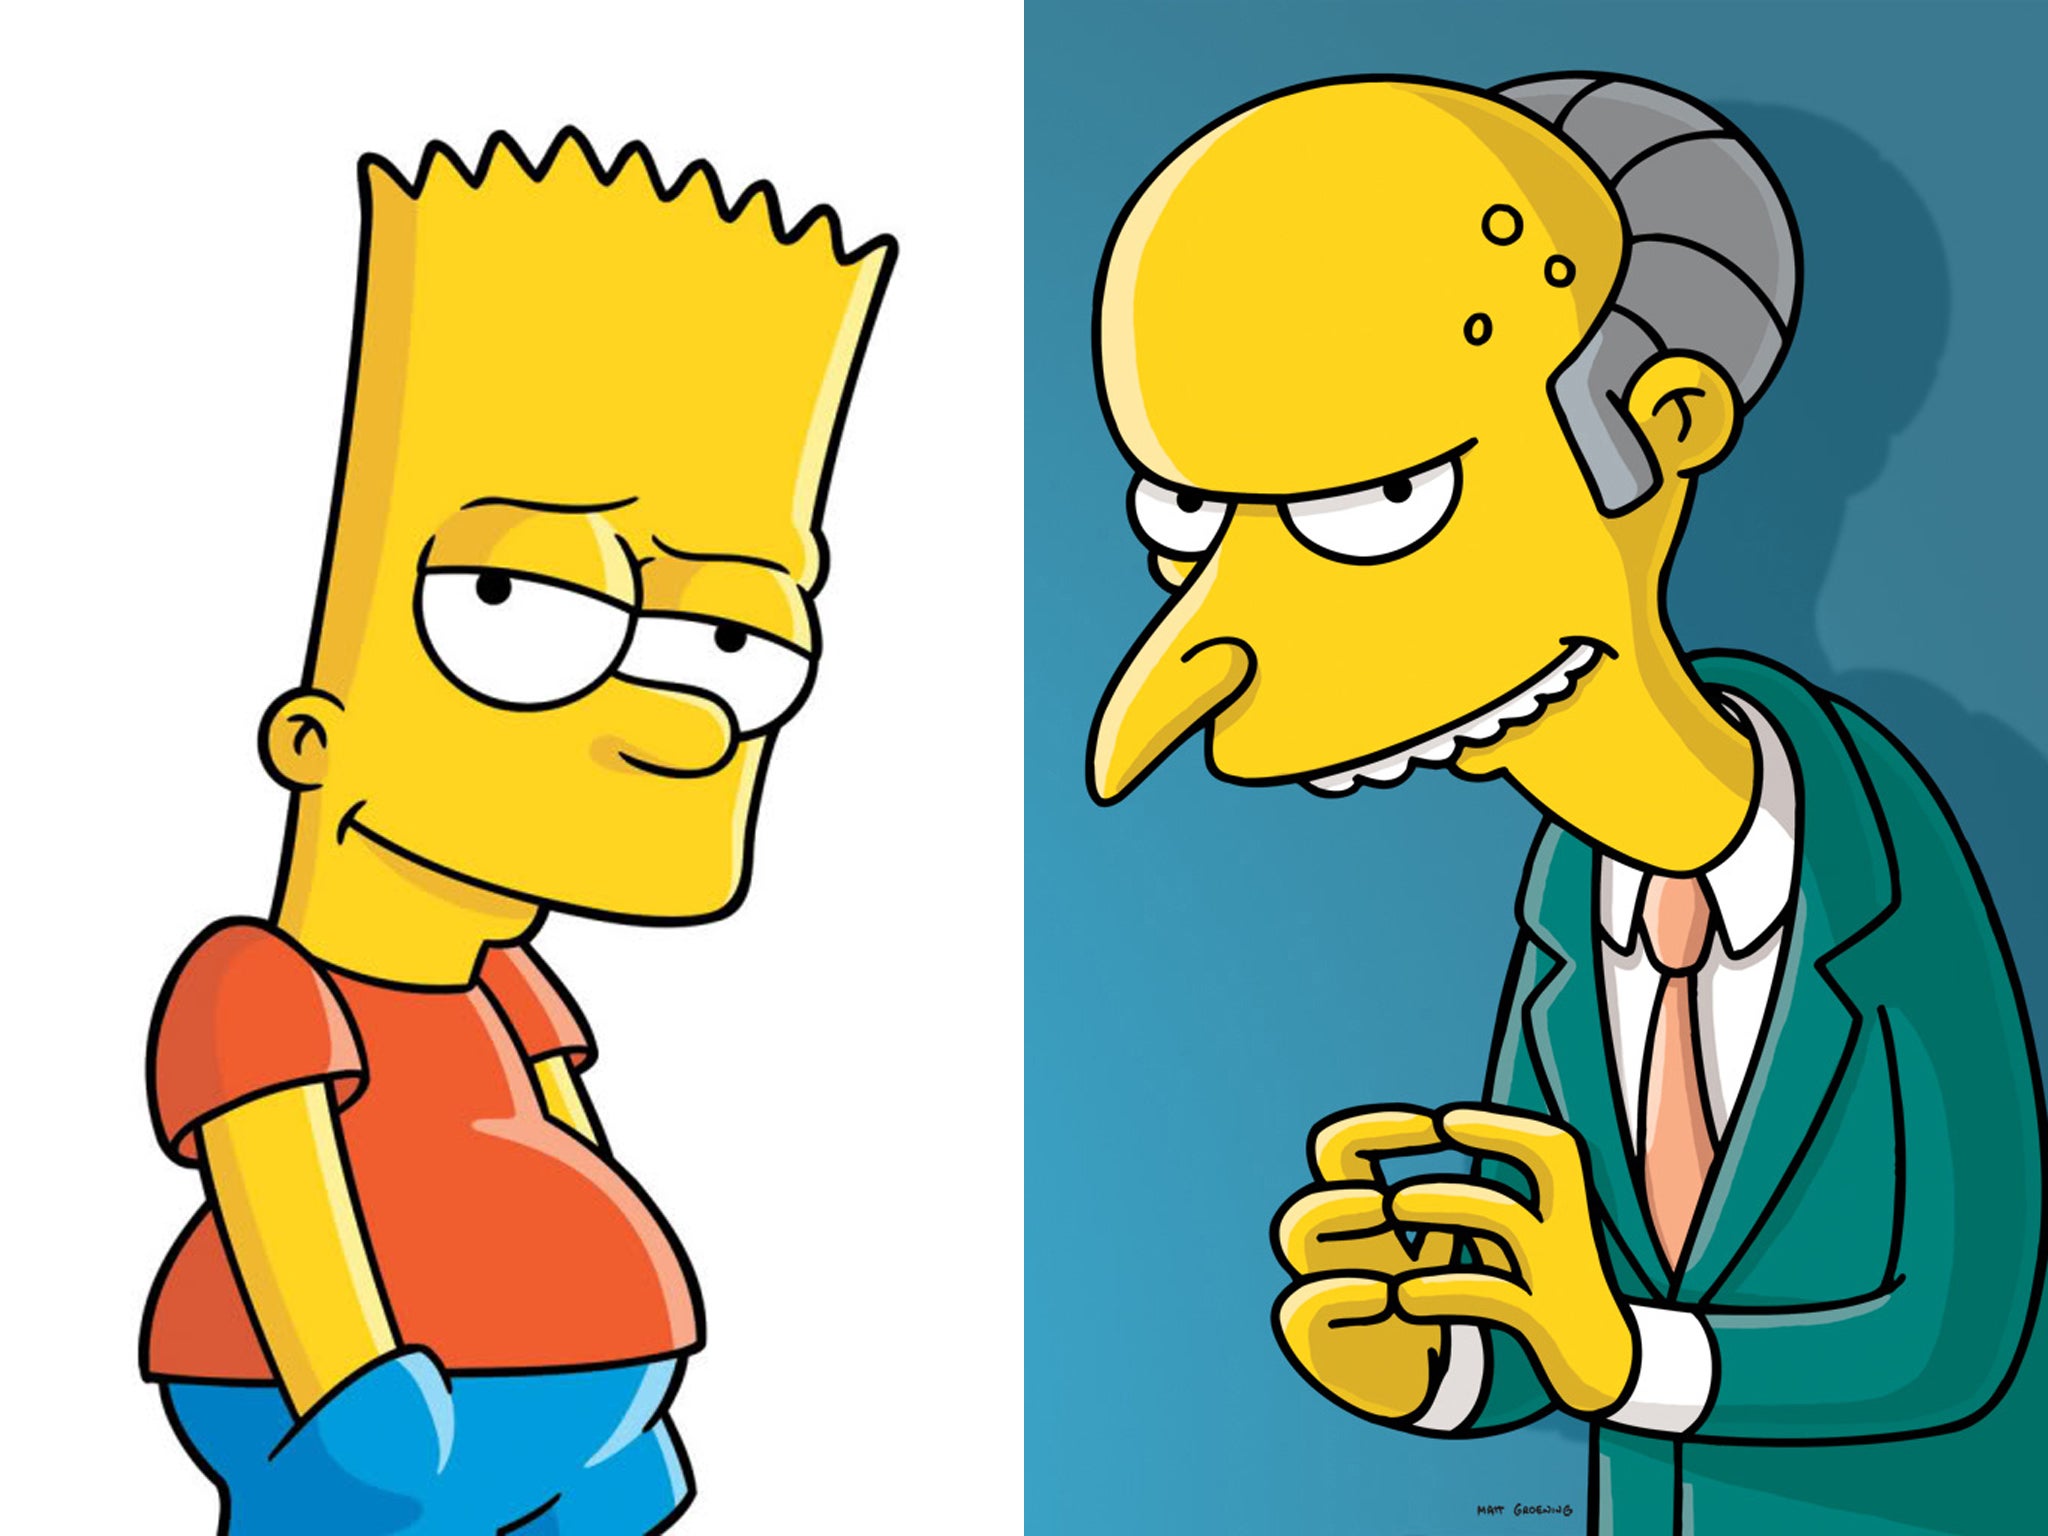 Not the defendant and judge, but their fictional namesakes: Bart Simpson and Mr Burns from The Simpsons